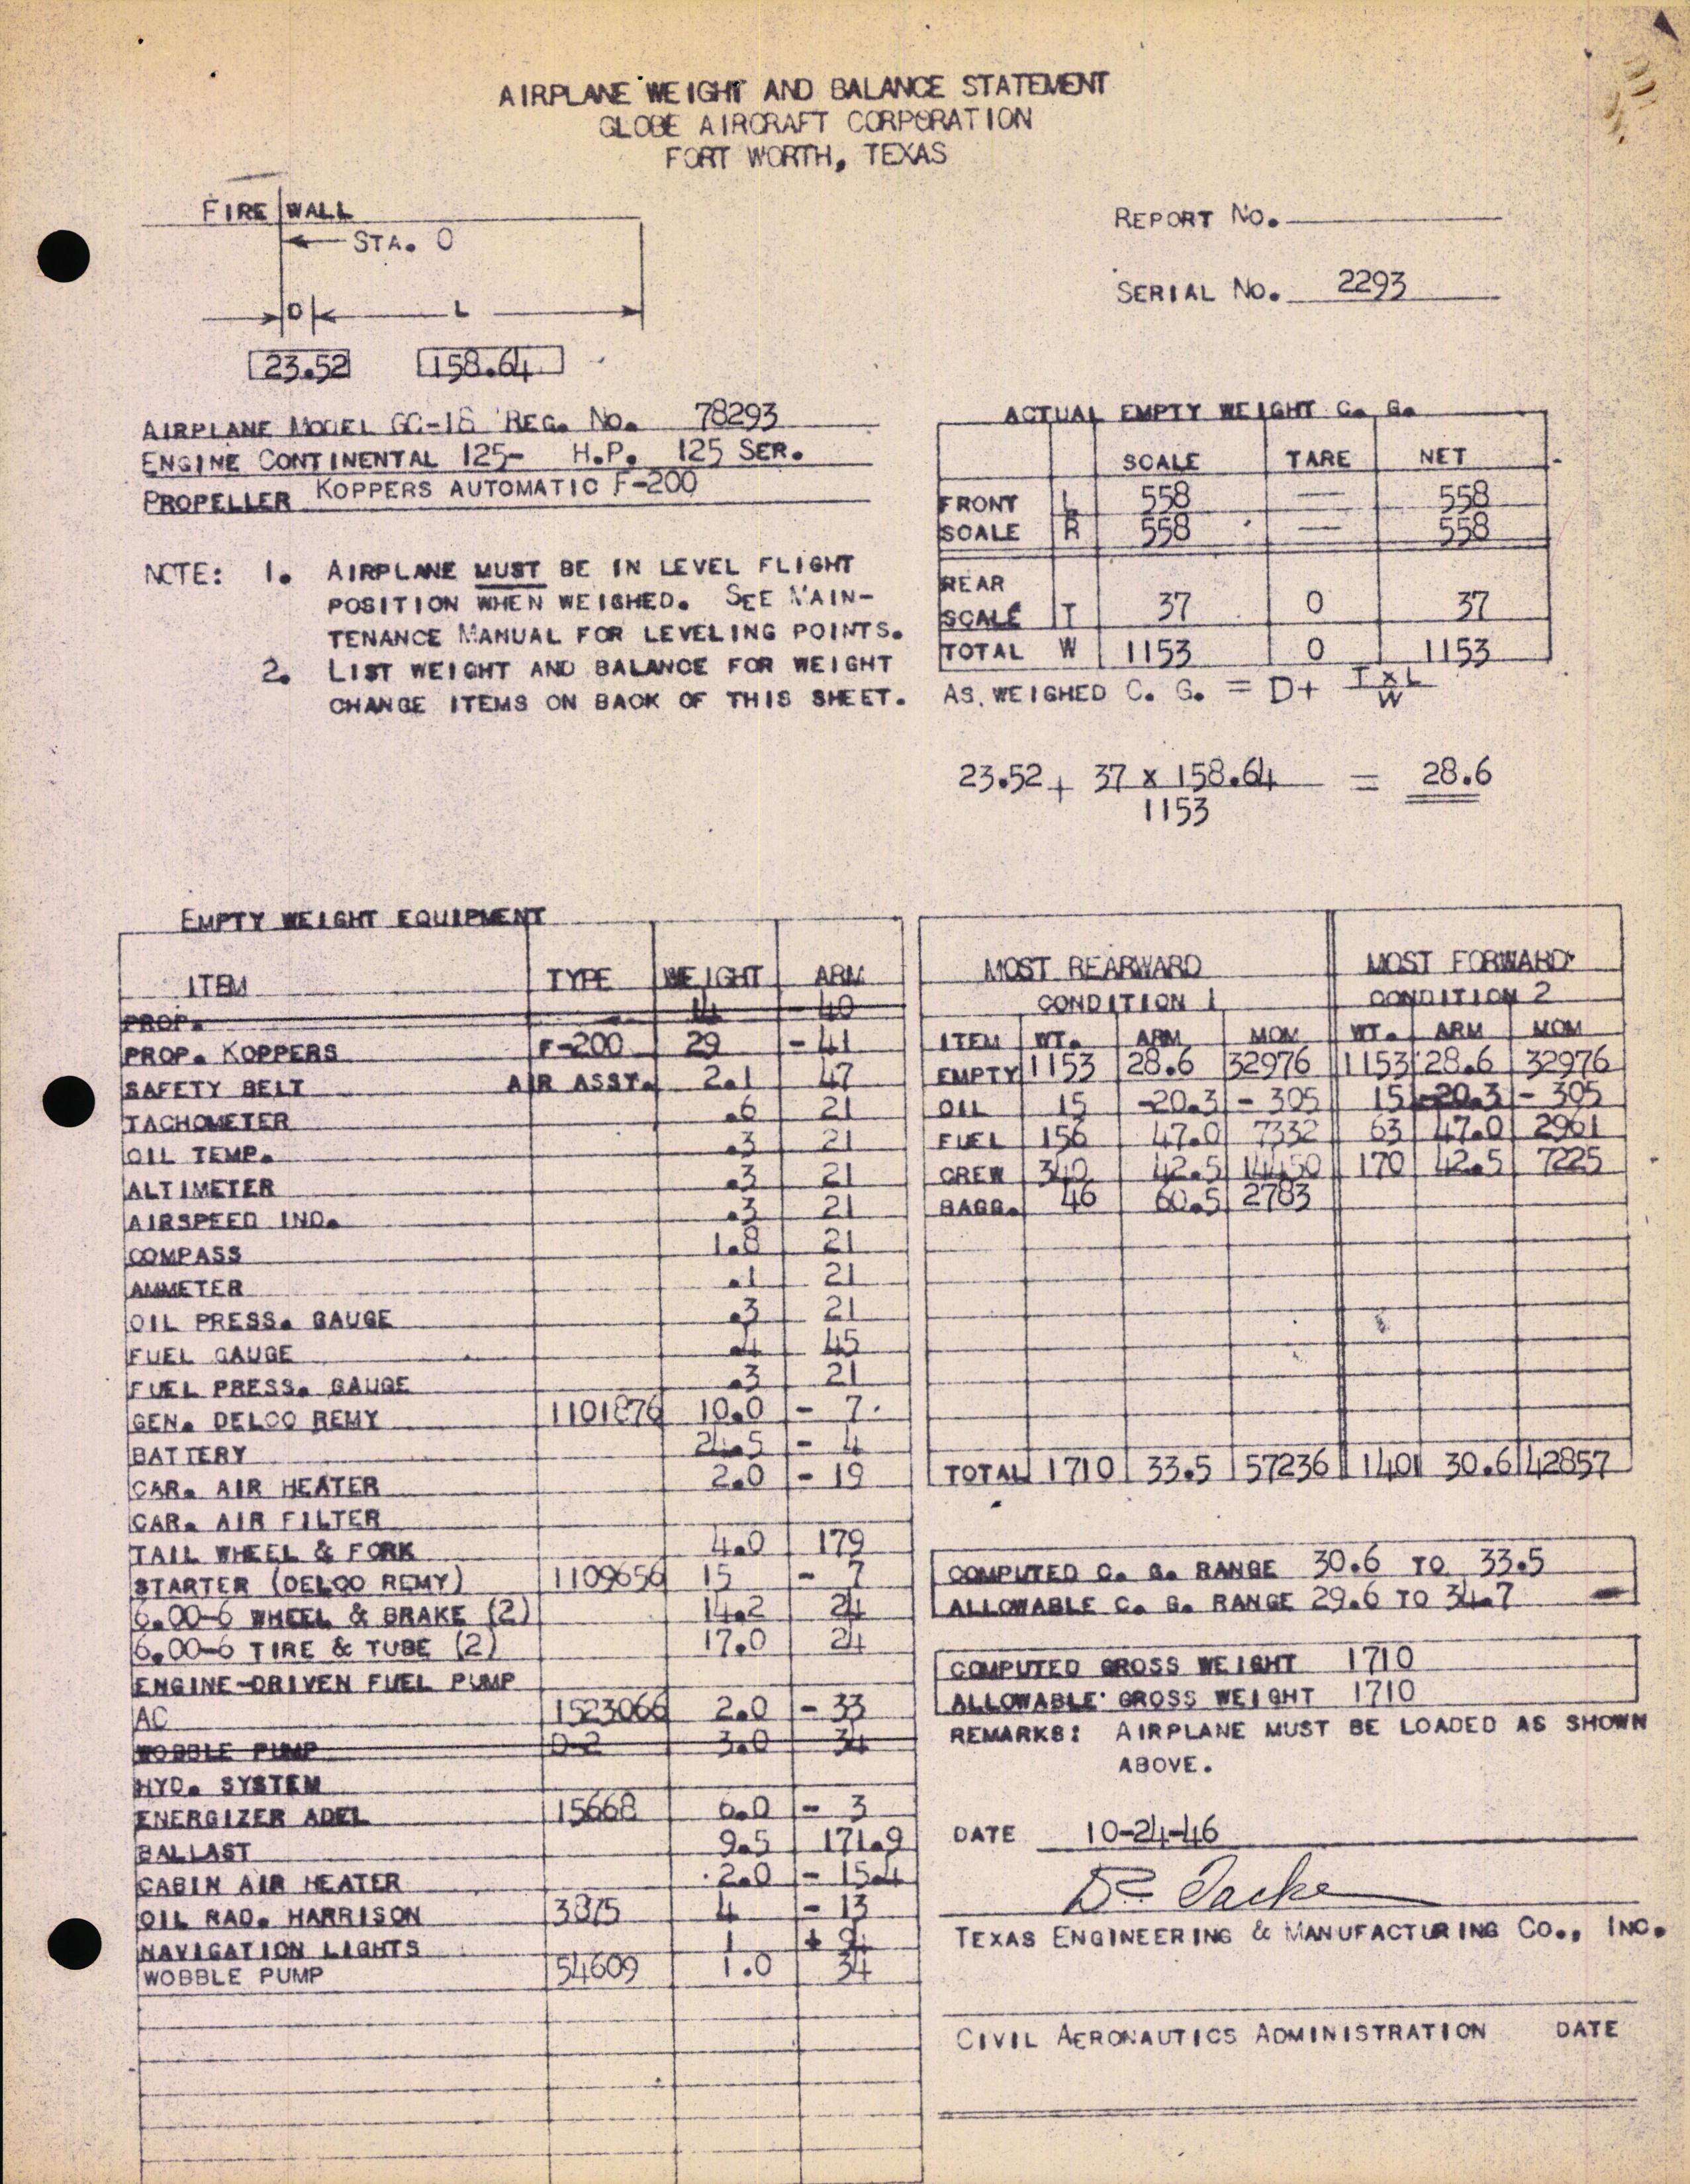 Sample page 2 from AirCorps Library document: Technical Information for Serial Number 2293